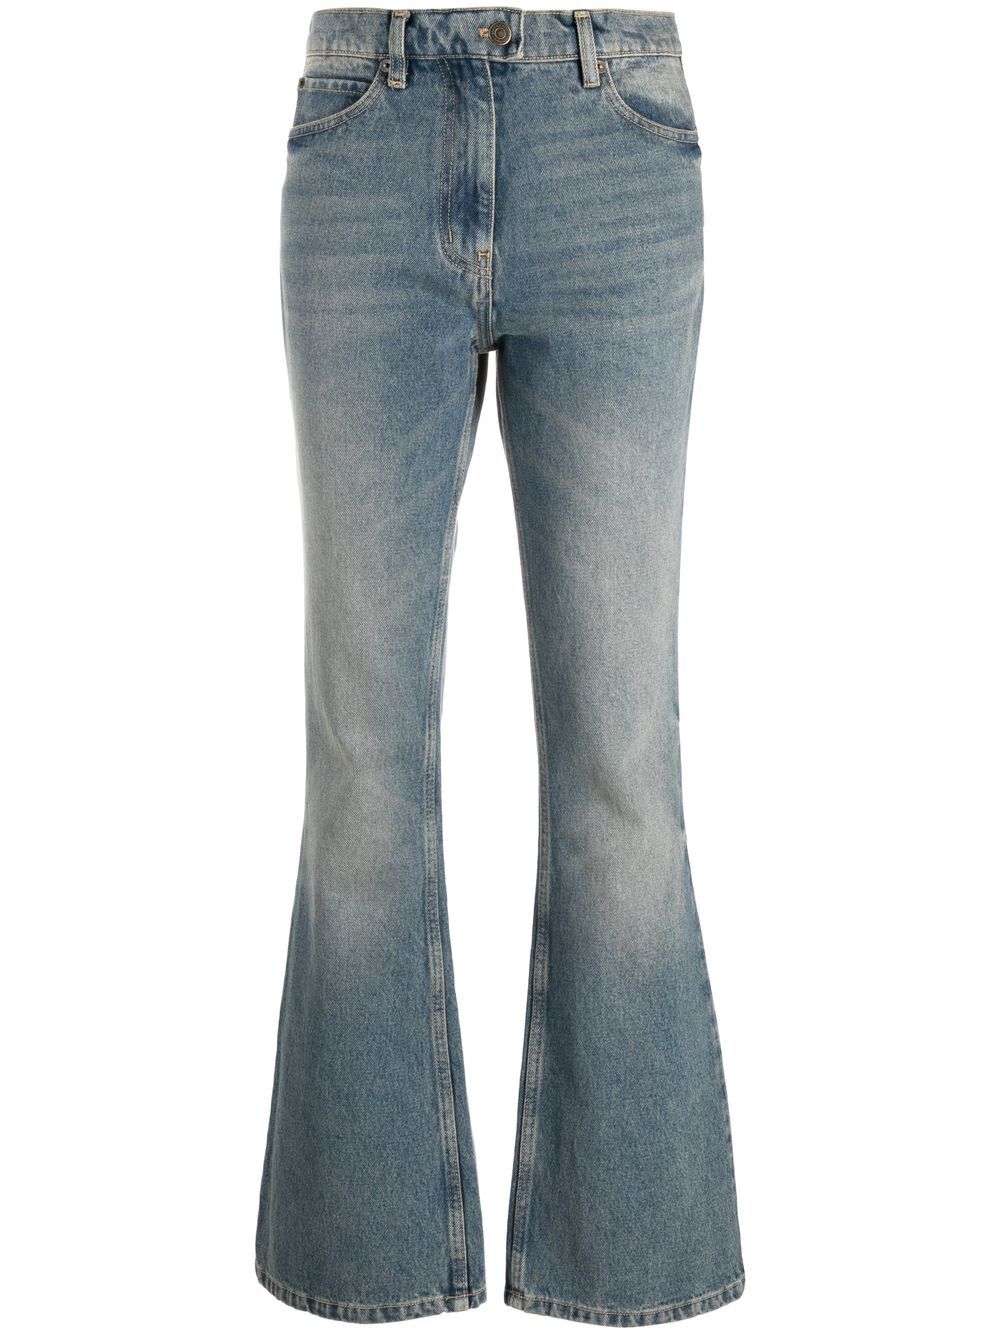 Courrèges Distressed Flared Leg Jeans - Farfetch